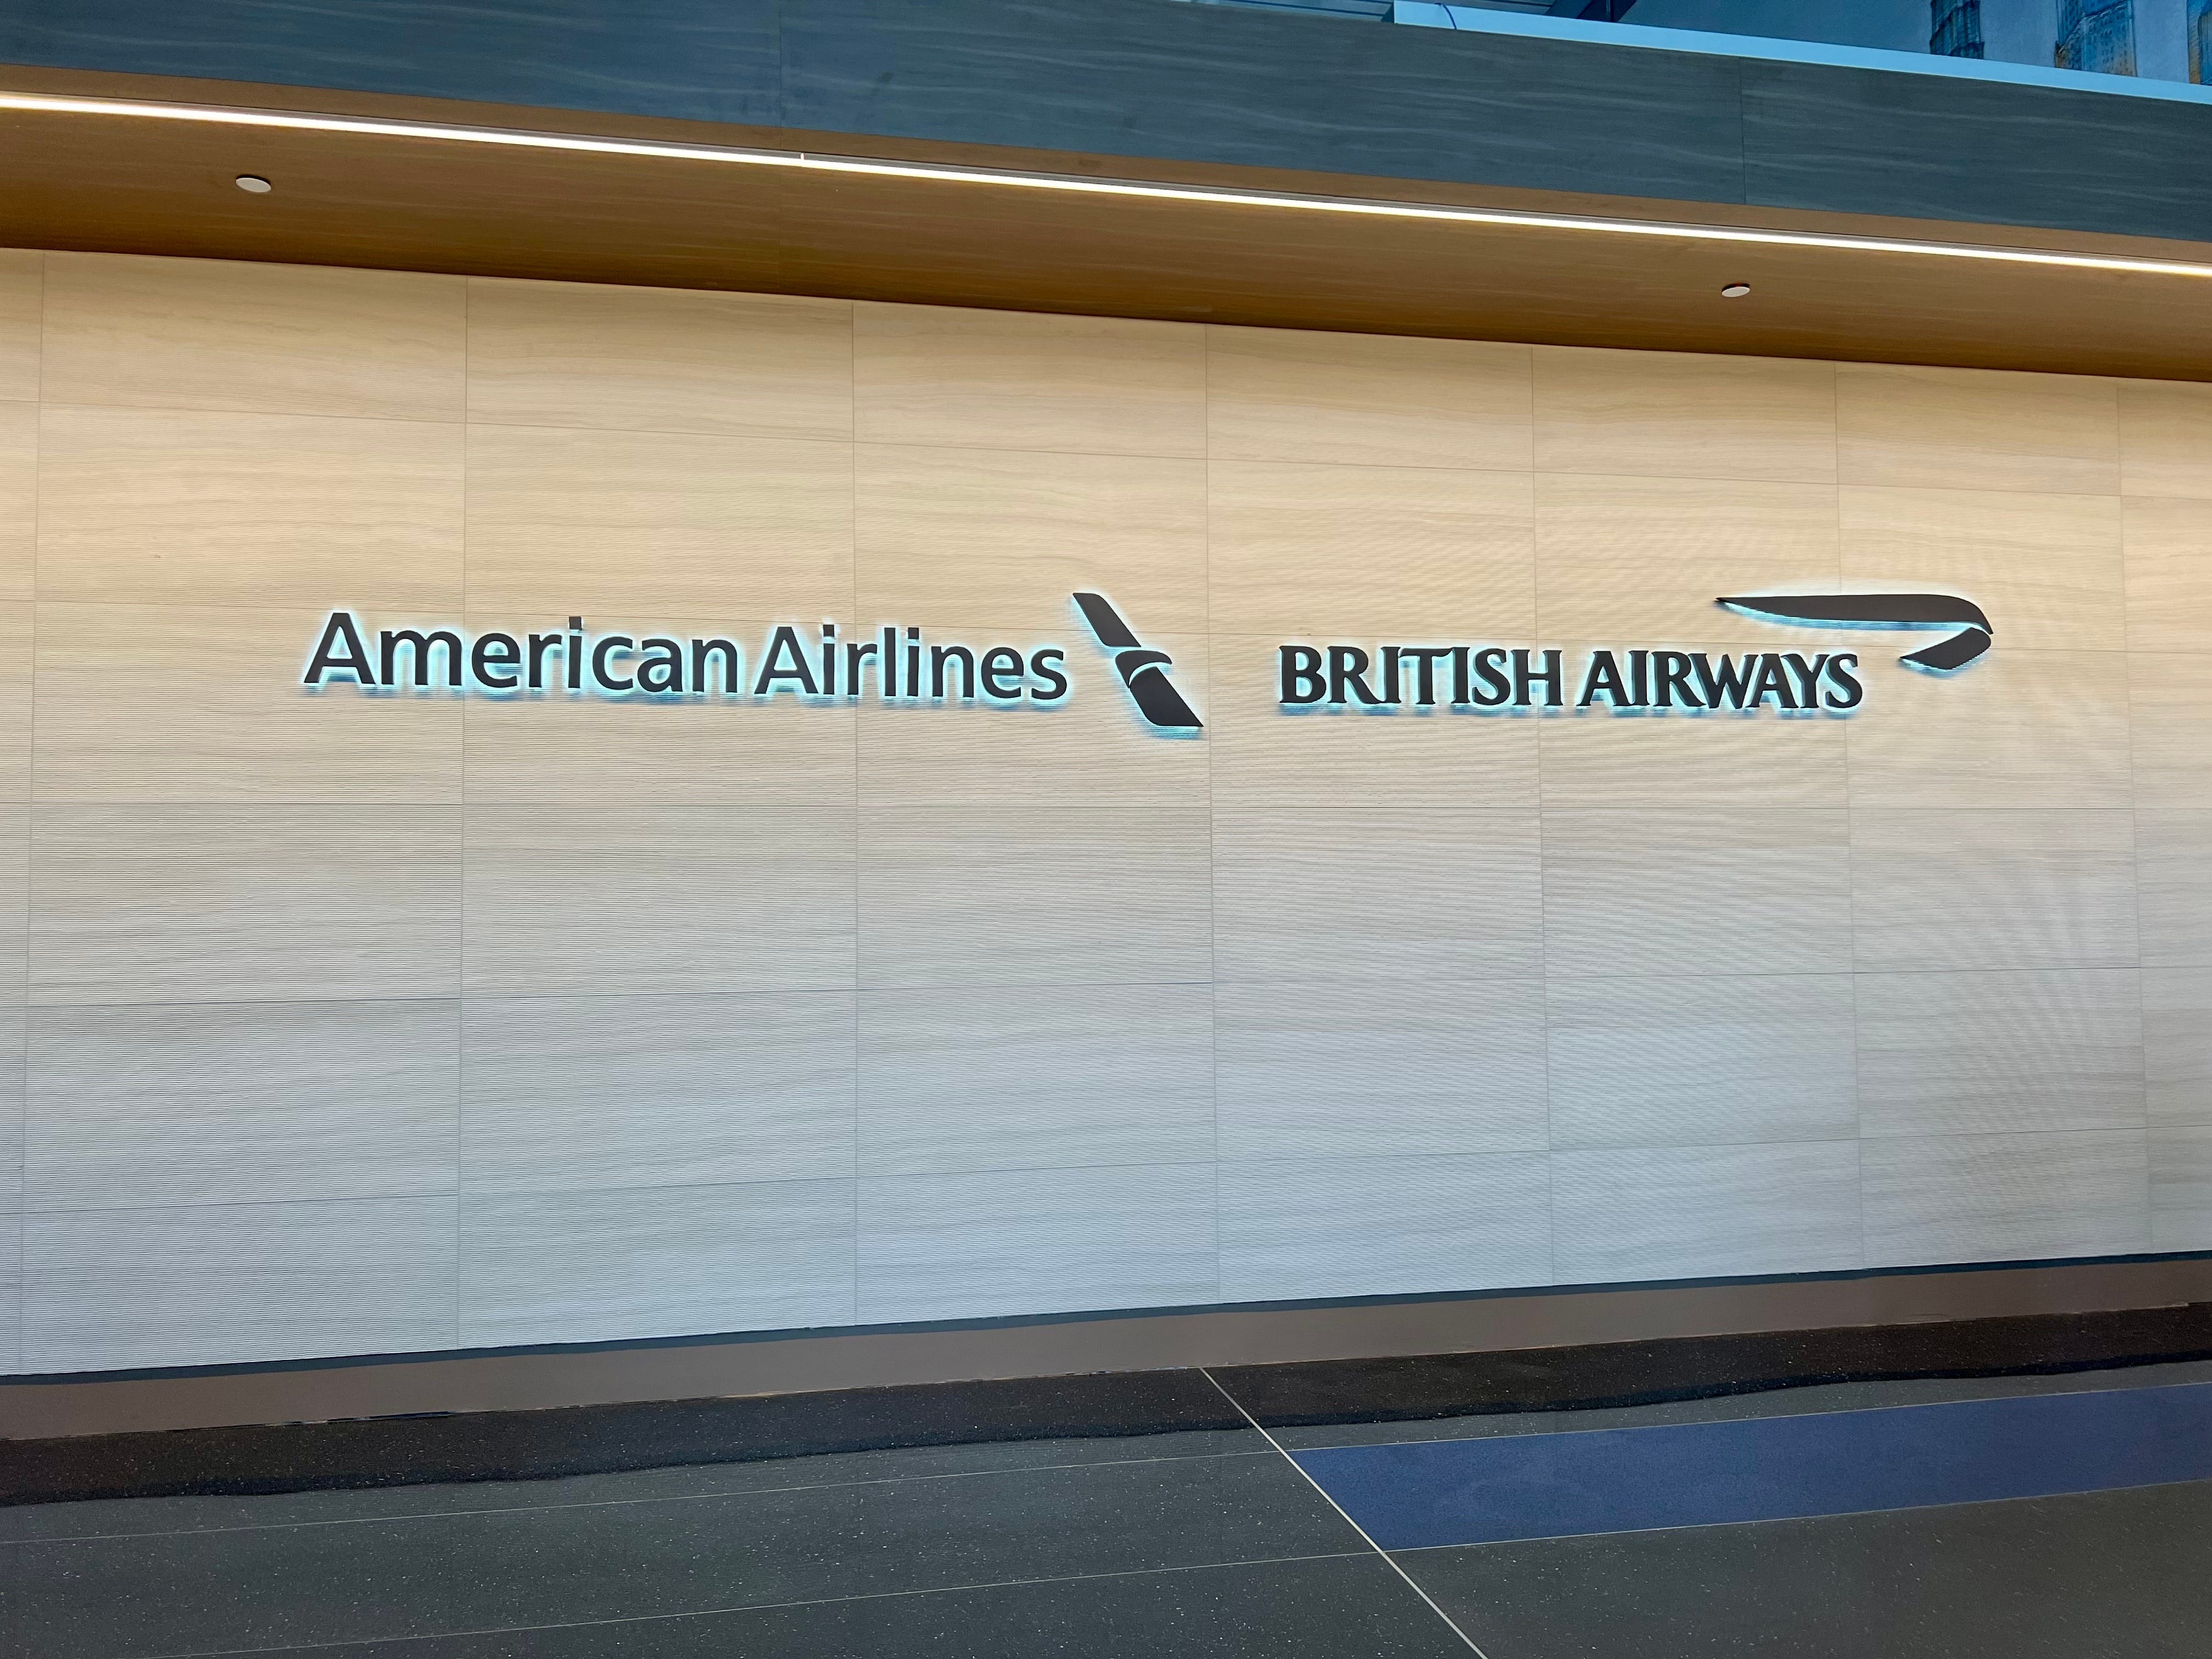 American Airlines and British Airways in Terminal 8 at JFK.